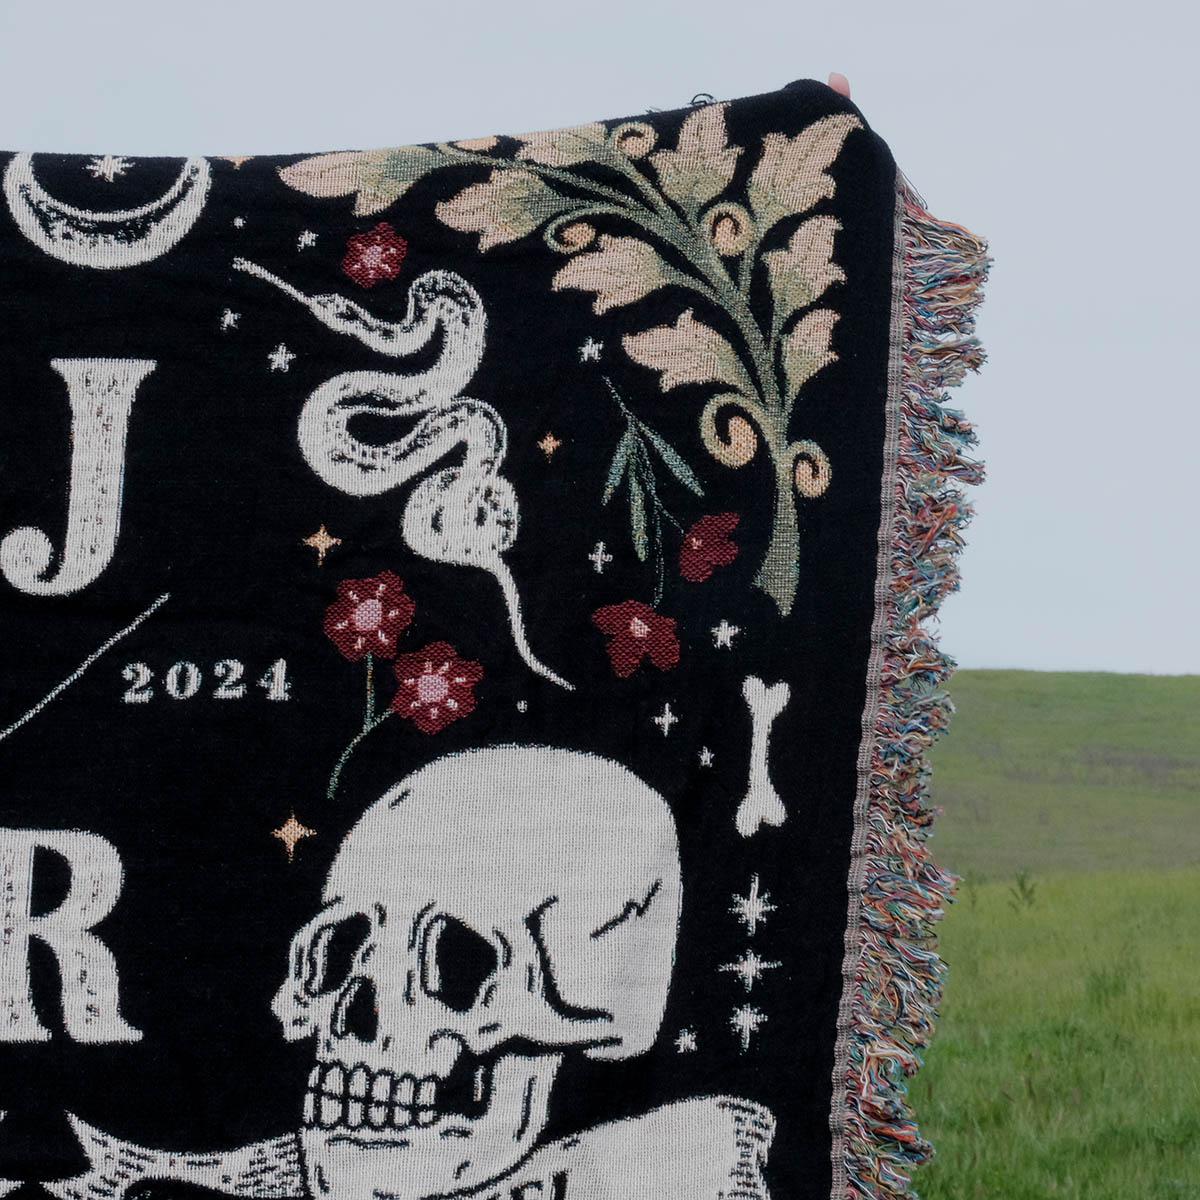 His and Hers Skulls Personalized Blanket